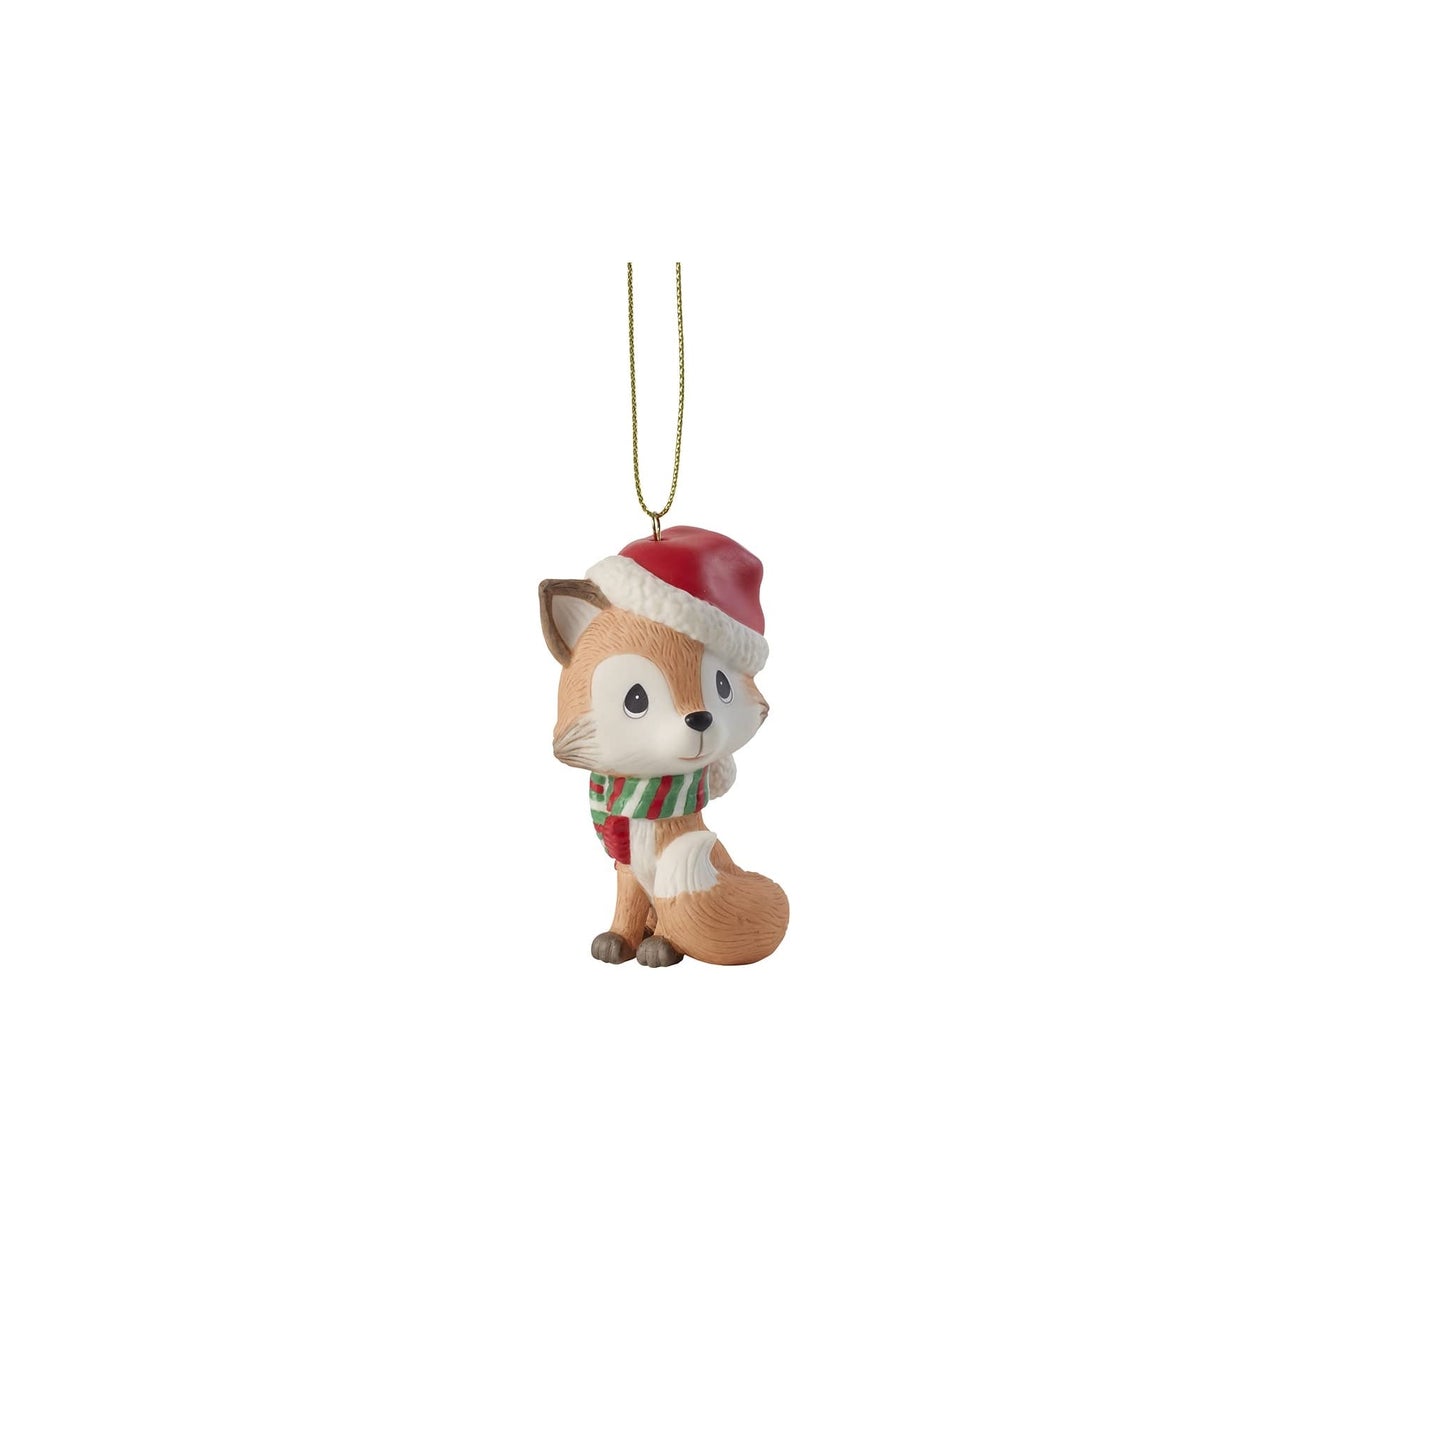 Precious Moments "Cozy Christmas Wishes" Ornament